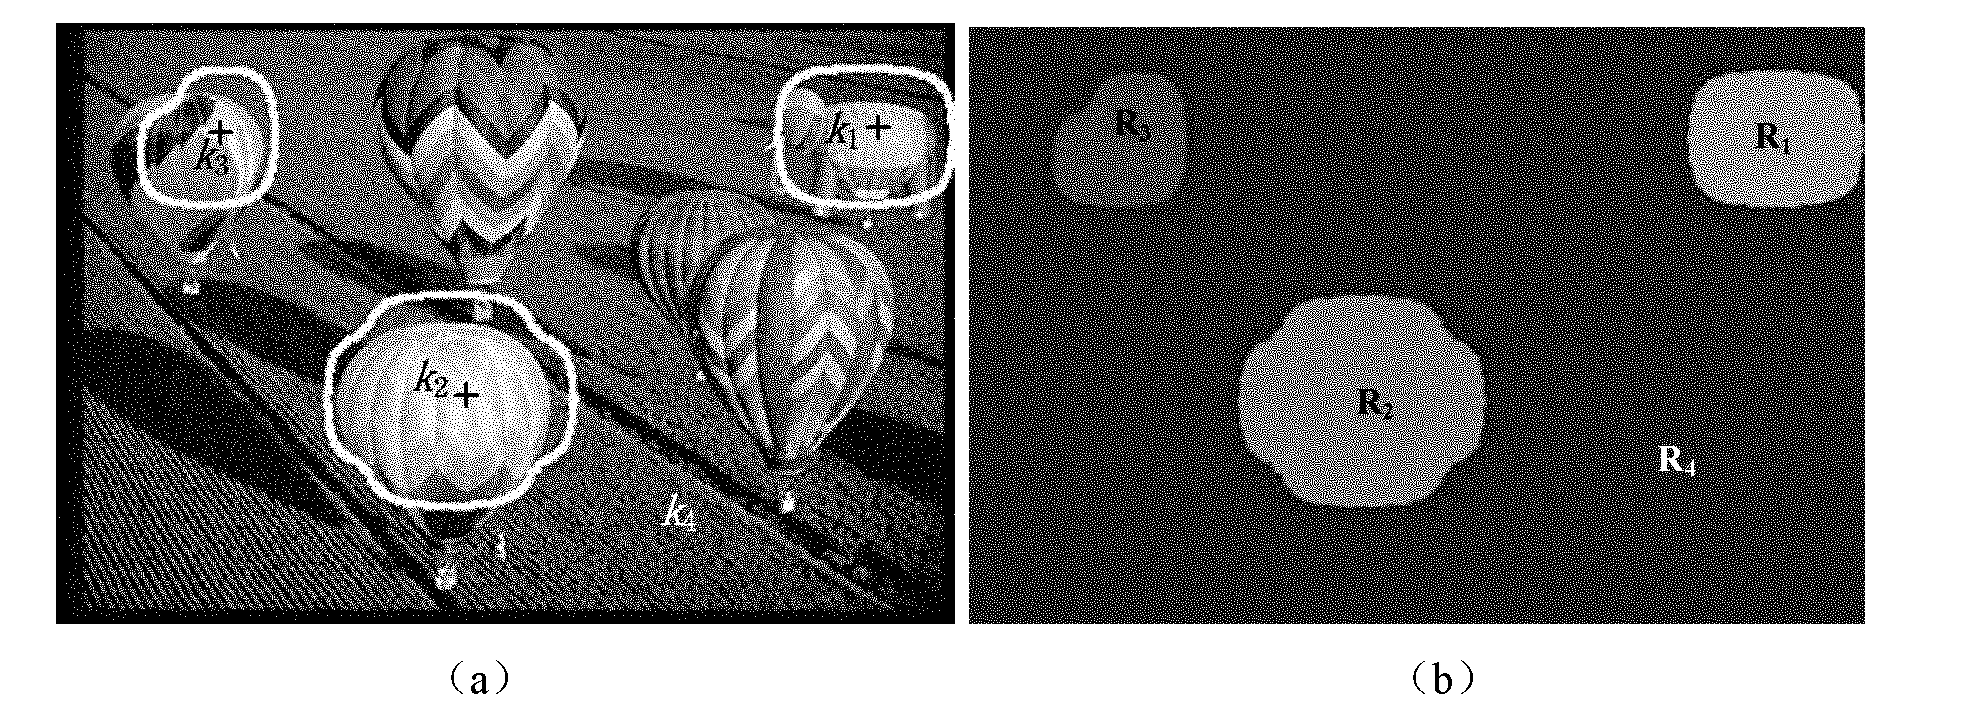 Method for encoding and decoding JPEG2000 image based on vision potential attention target area